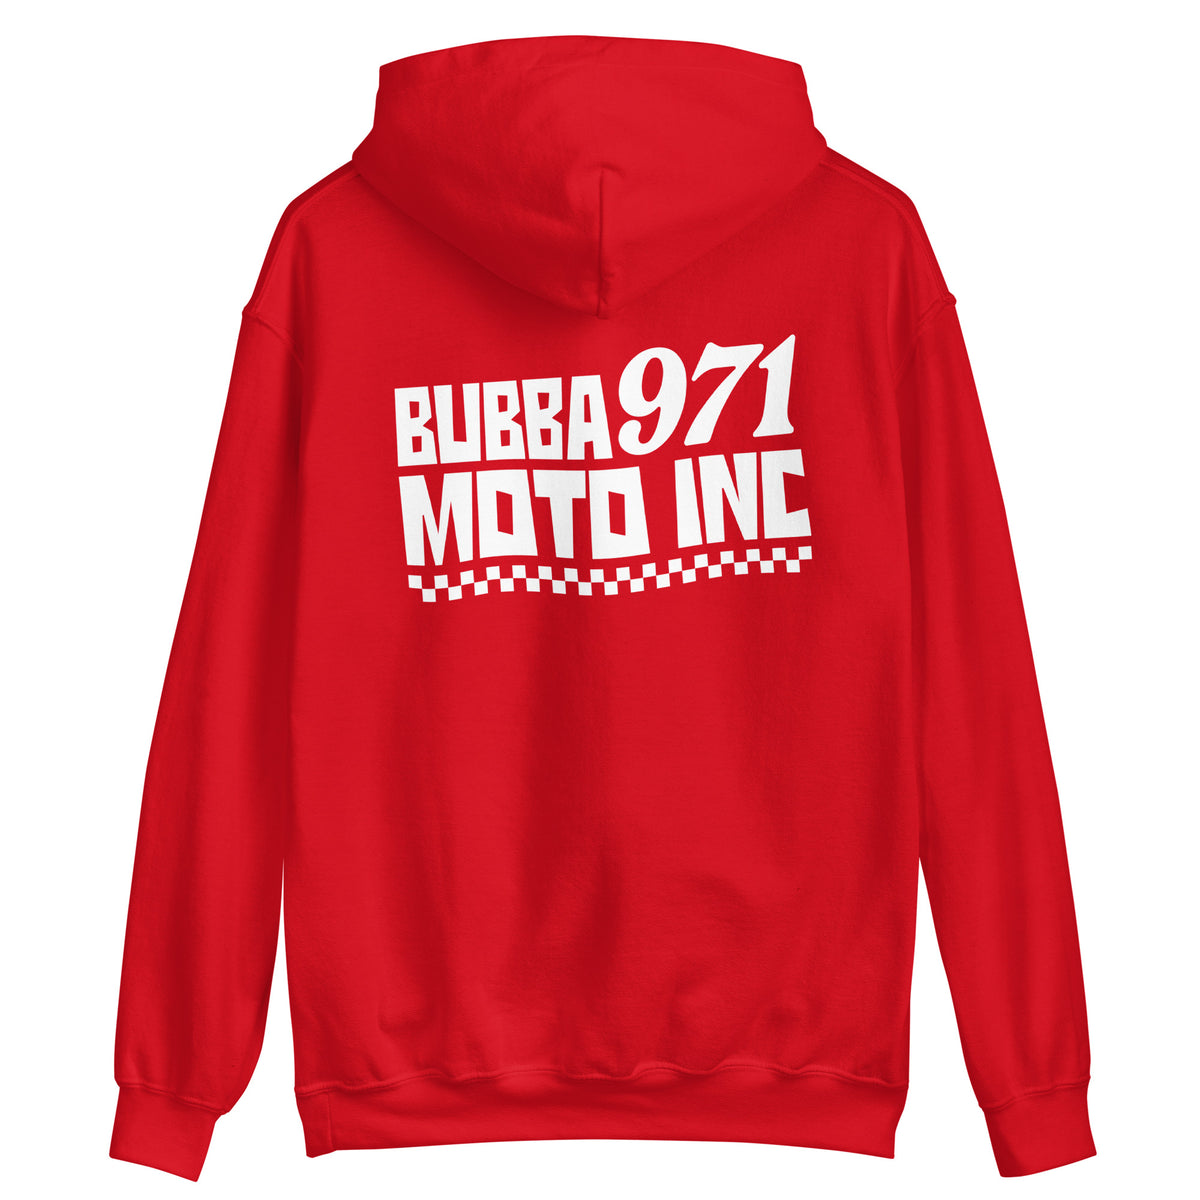 Bubba 971 - The Wall - Hoodie